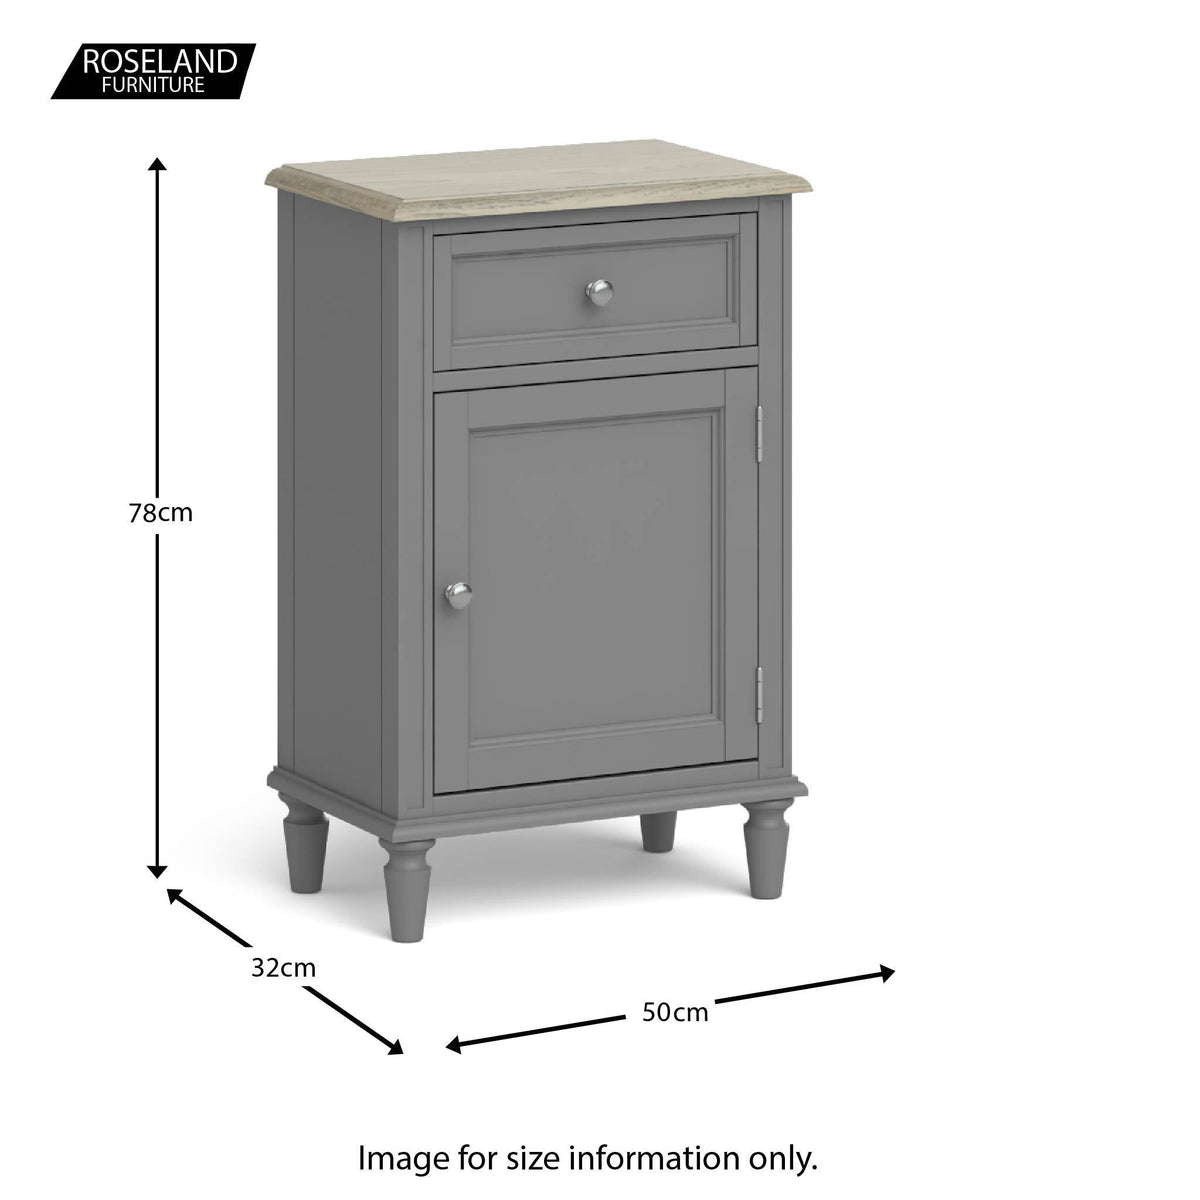 Dimensions for The Mulsanne Grey French Style Hallway Telephone Cabinet